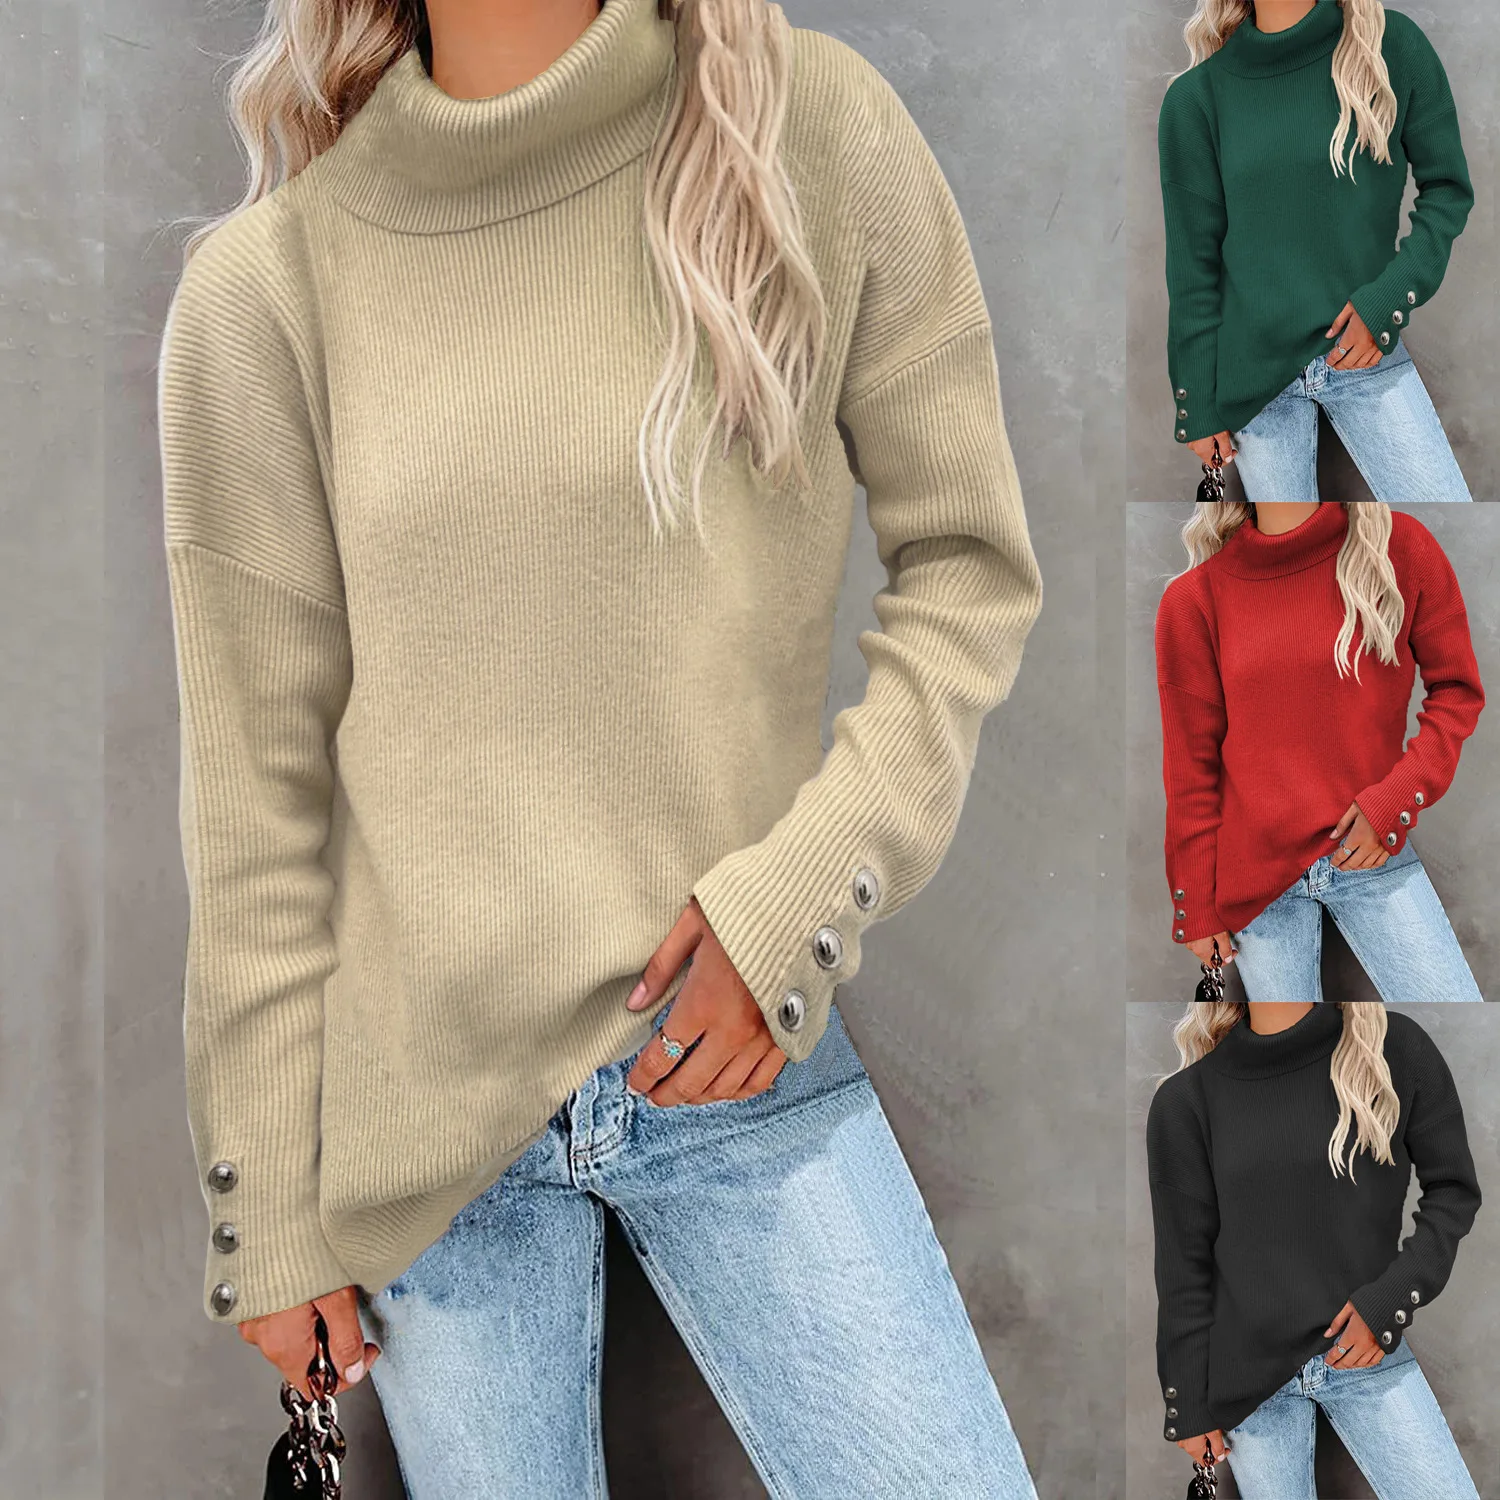 Fashion Sweater Autumn and Winter Women's New Stripe High Neck Long Sleeve Knitwear Casual Loose Pullover Sweater Women / Female